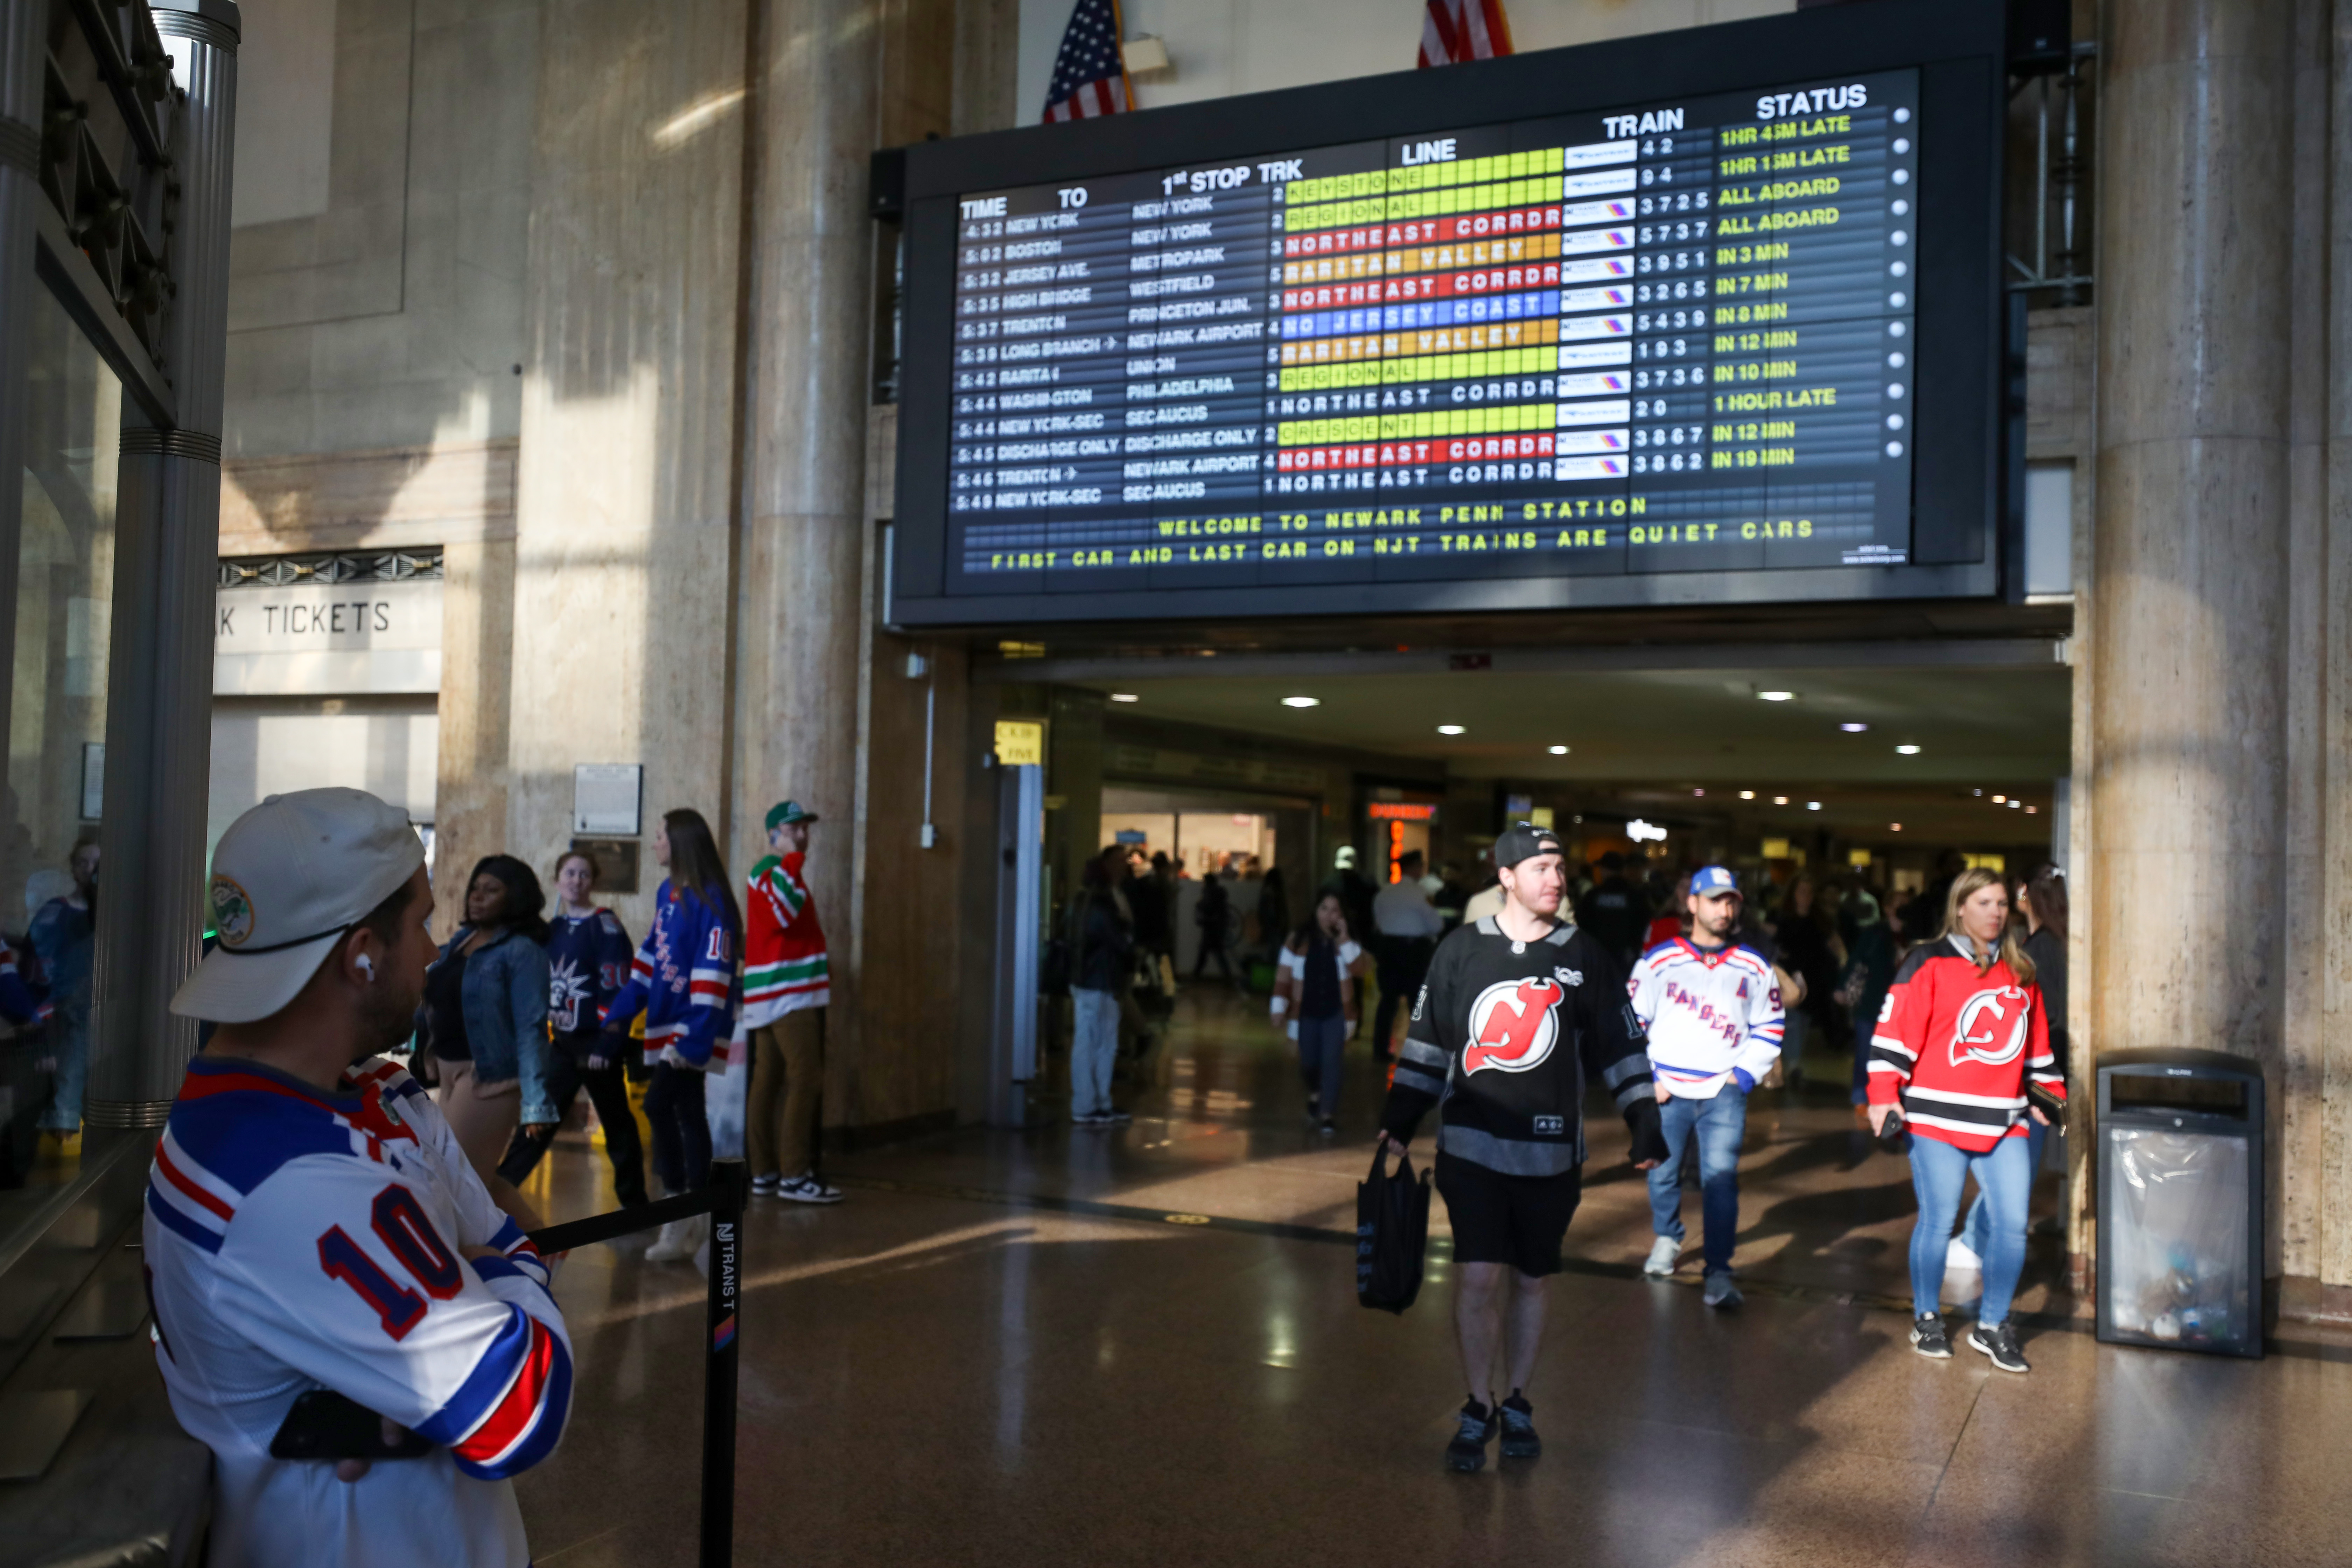 Fans stream out of Newark Penn Station on Tuesday, April 18, 2023 after arriving via train in Newark, N.J. The New York Rangers beat the New Jersey Devils, 5-1, in Game 1 of the NHL Stanley Cup playoffs.